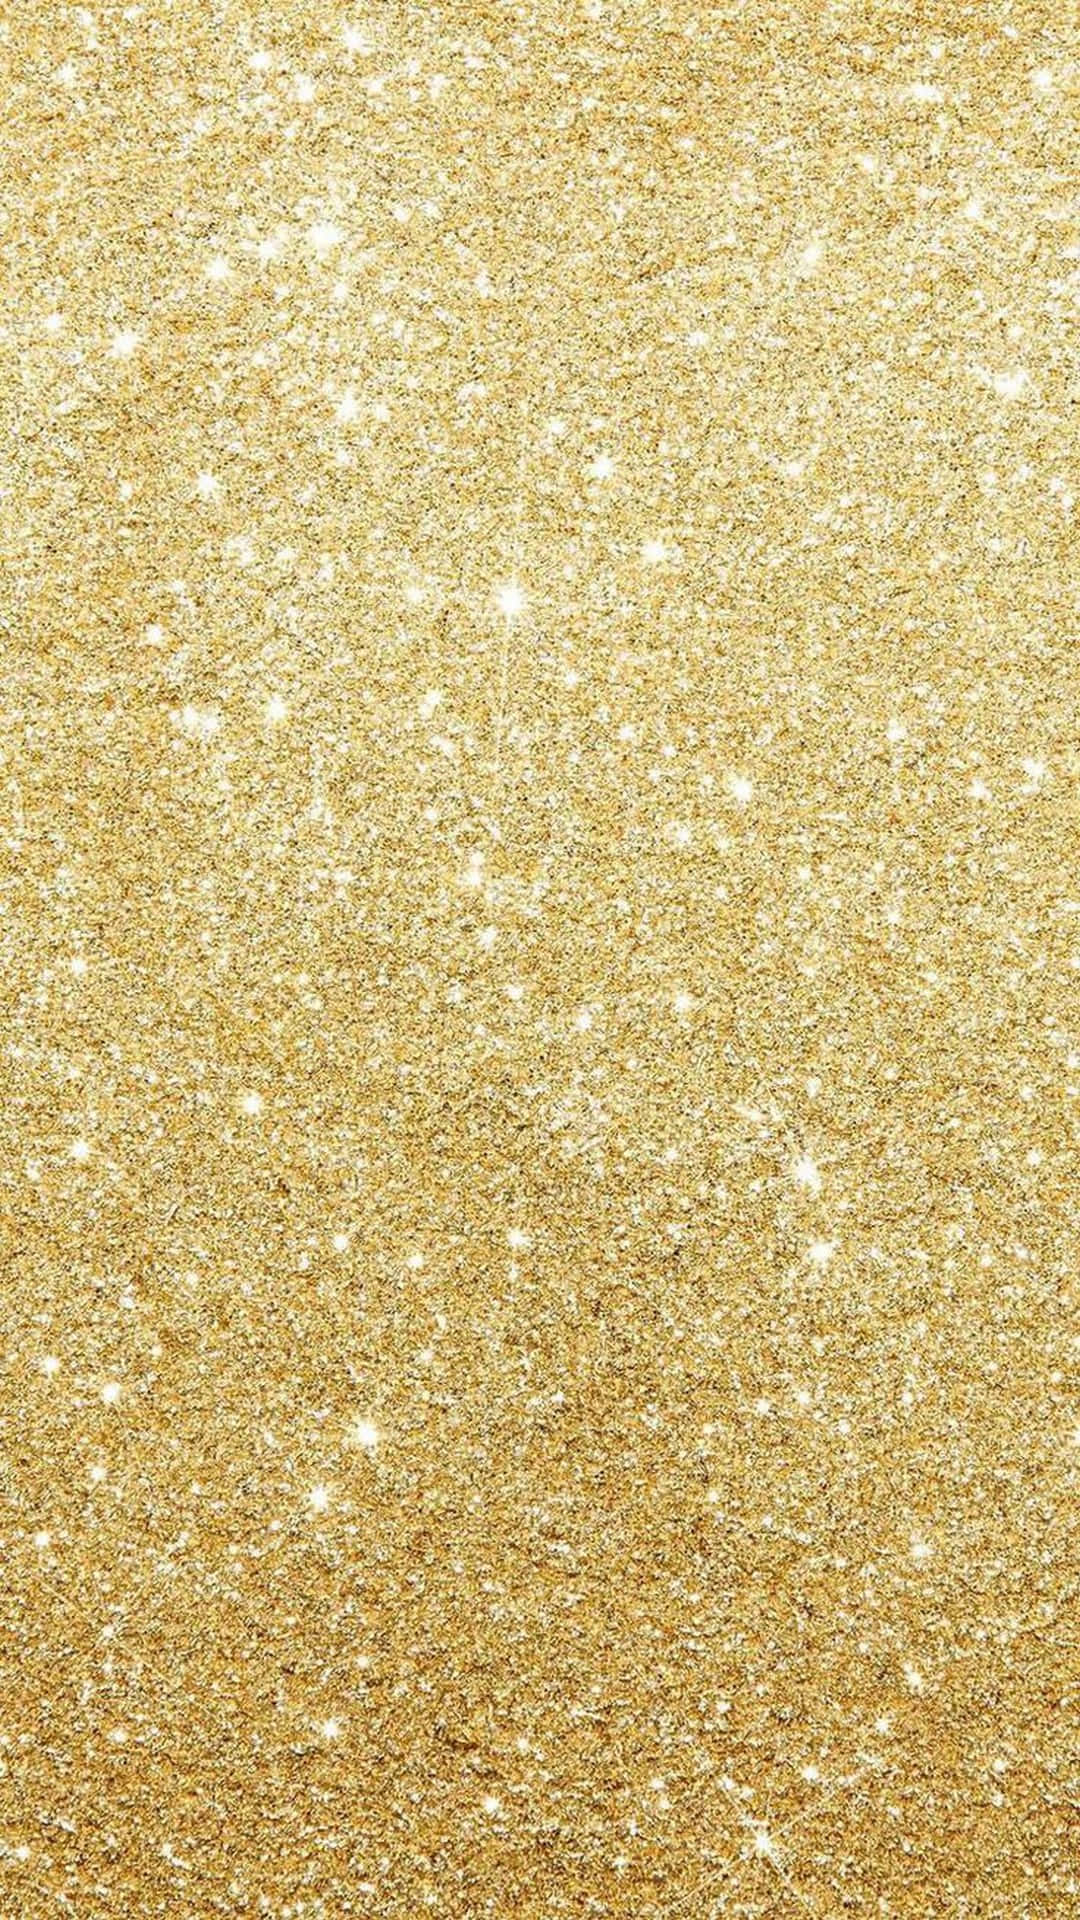 Gold IPhone Sparkling Coarse Texture Wallpaper